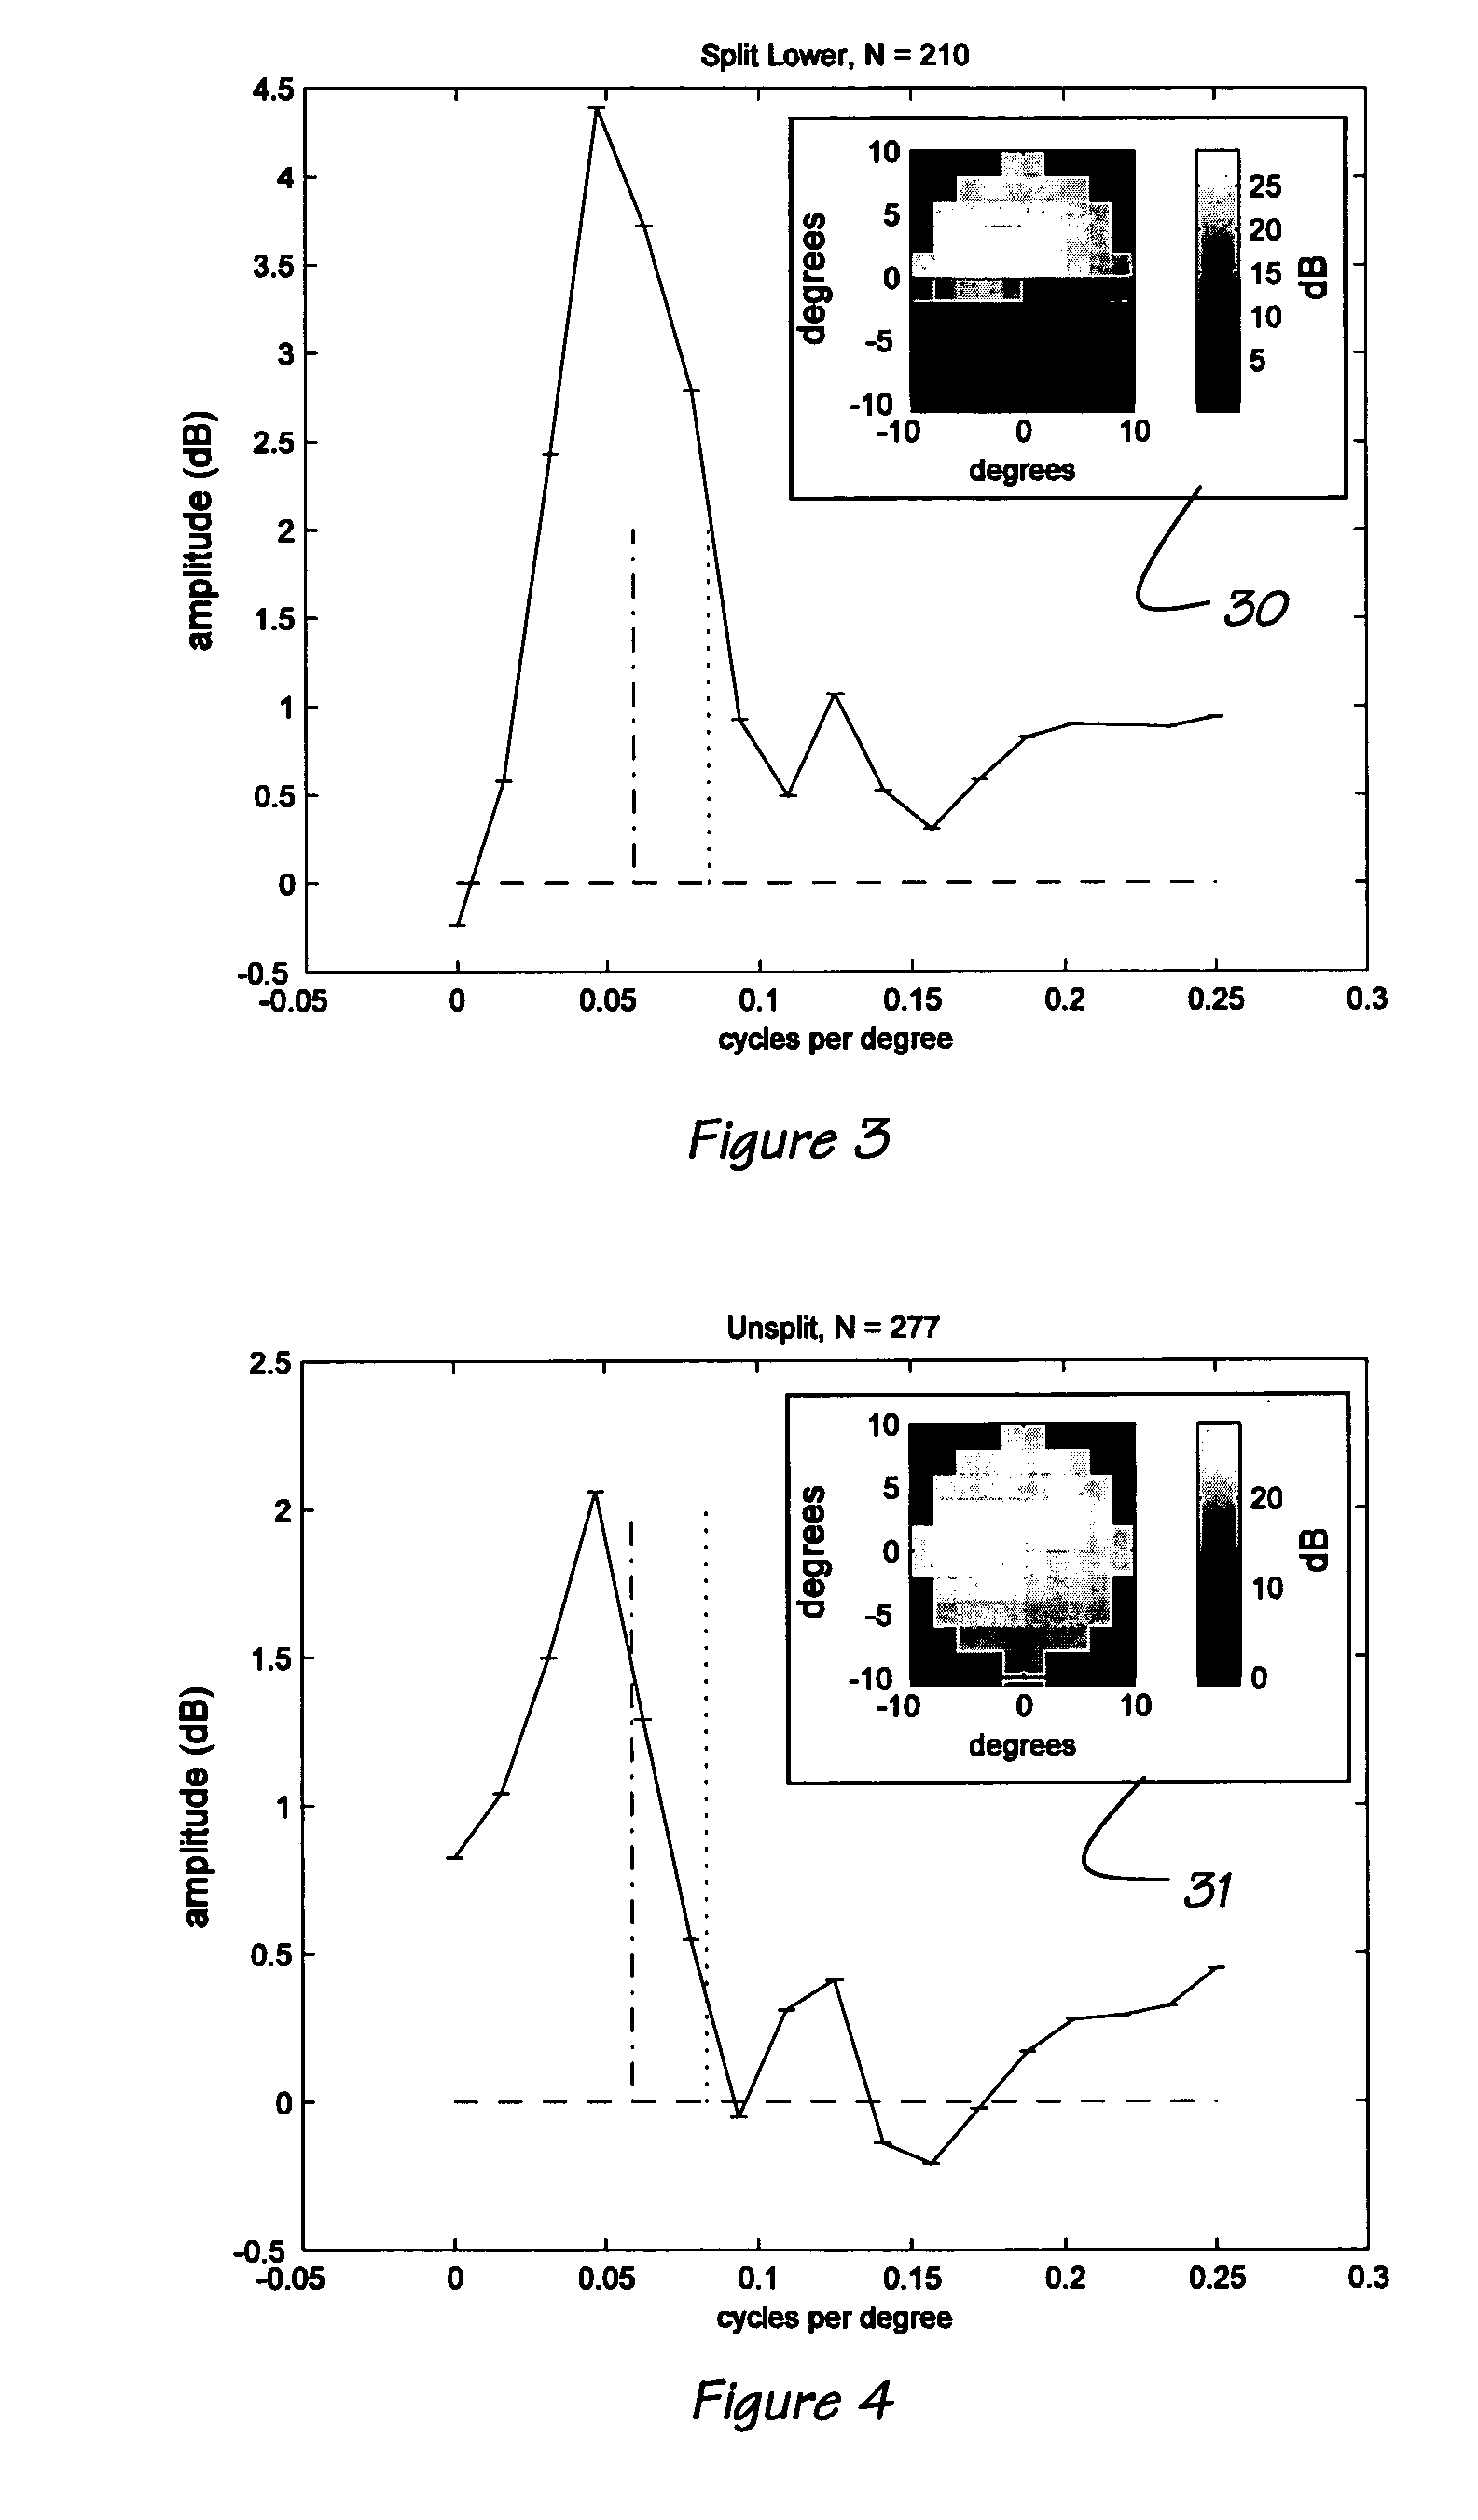 Method and Apparatus for Sensory Field Assessment